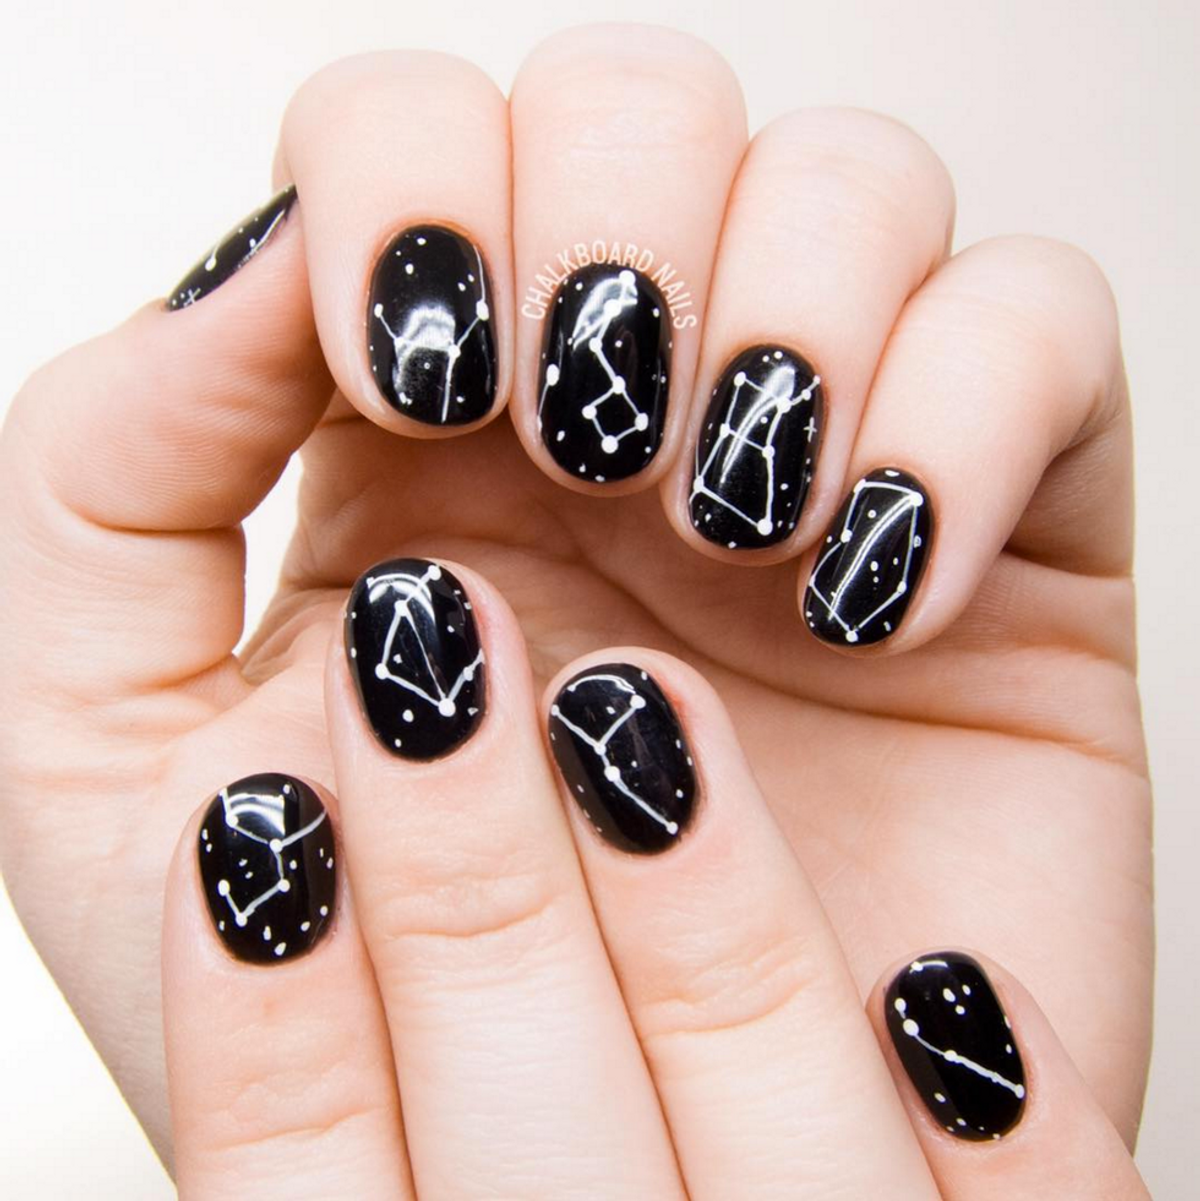 10 Nail Art Instagram Profiles That Will Make You Never Want To Do Your Own Nails Again